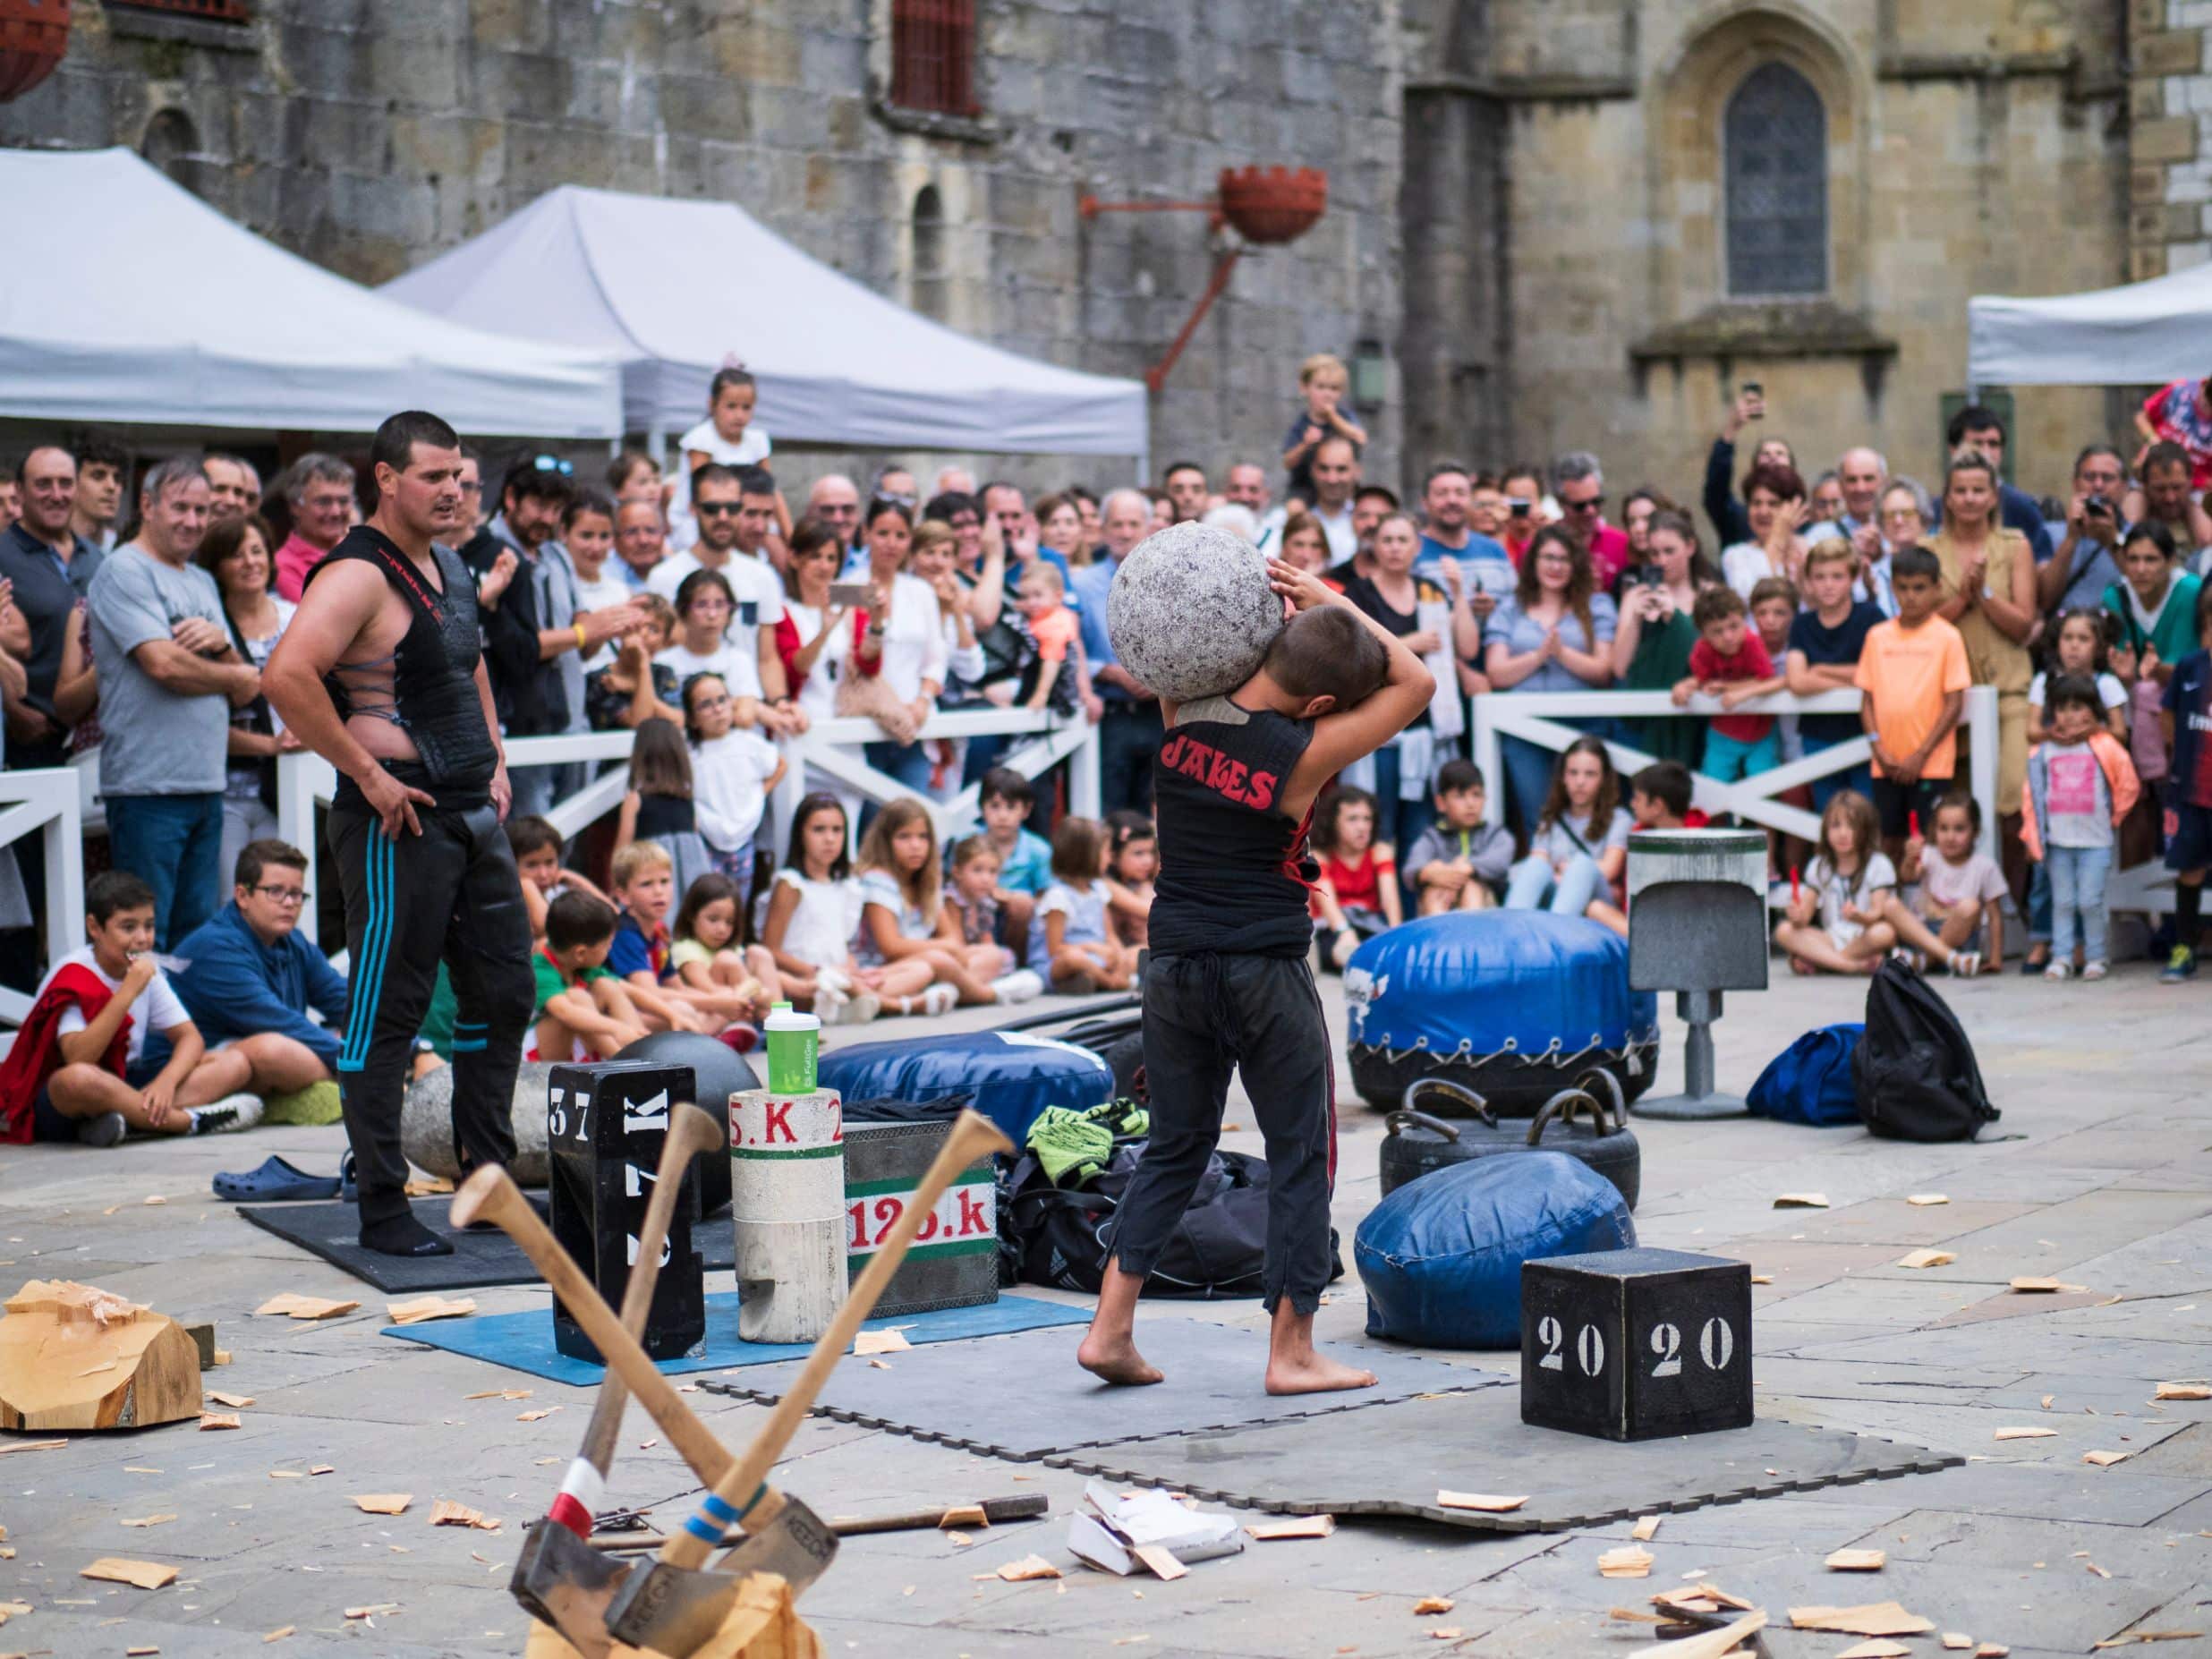 Hondarribia, Basque Country, Spain, August 5, 2019. Stone lifting (basque rural sport) display.